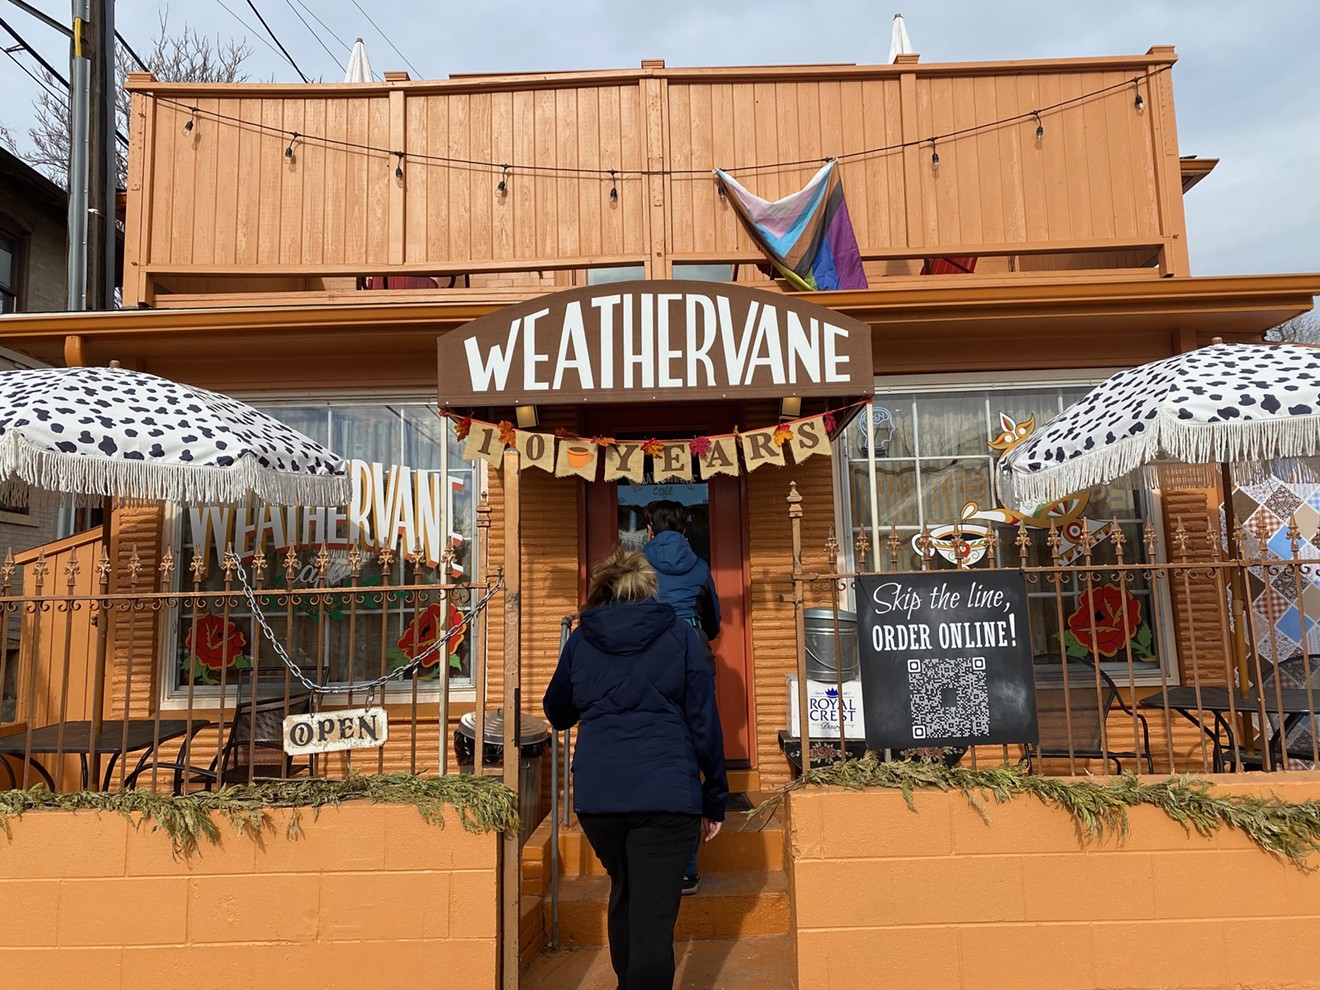 The Weathervane Cafe is a funky spot in a 128-year-old carriage house.